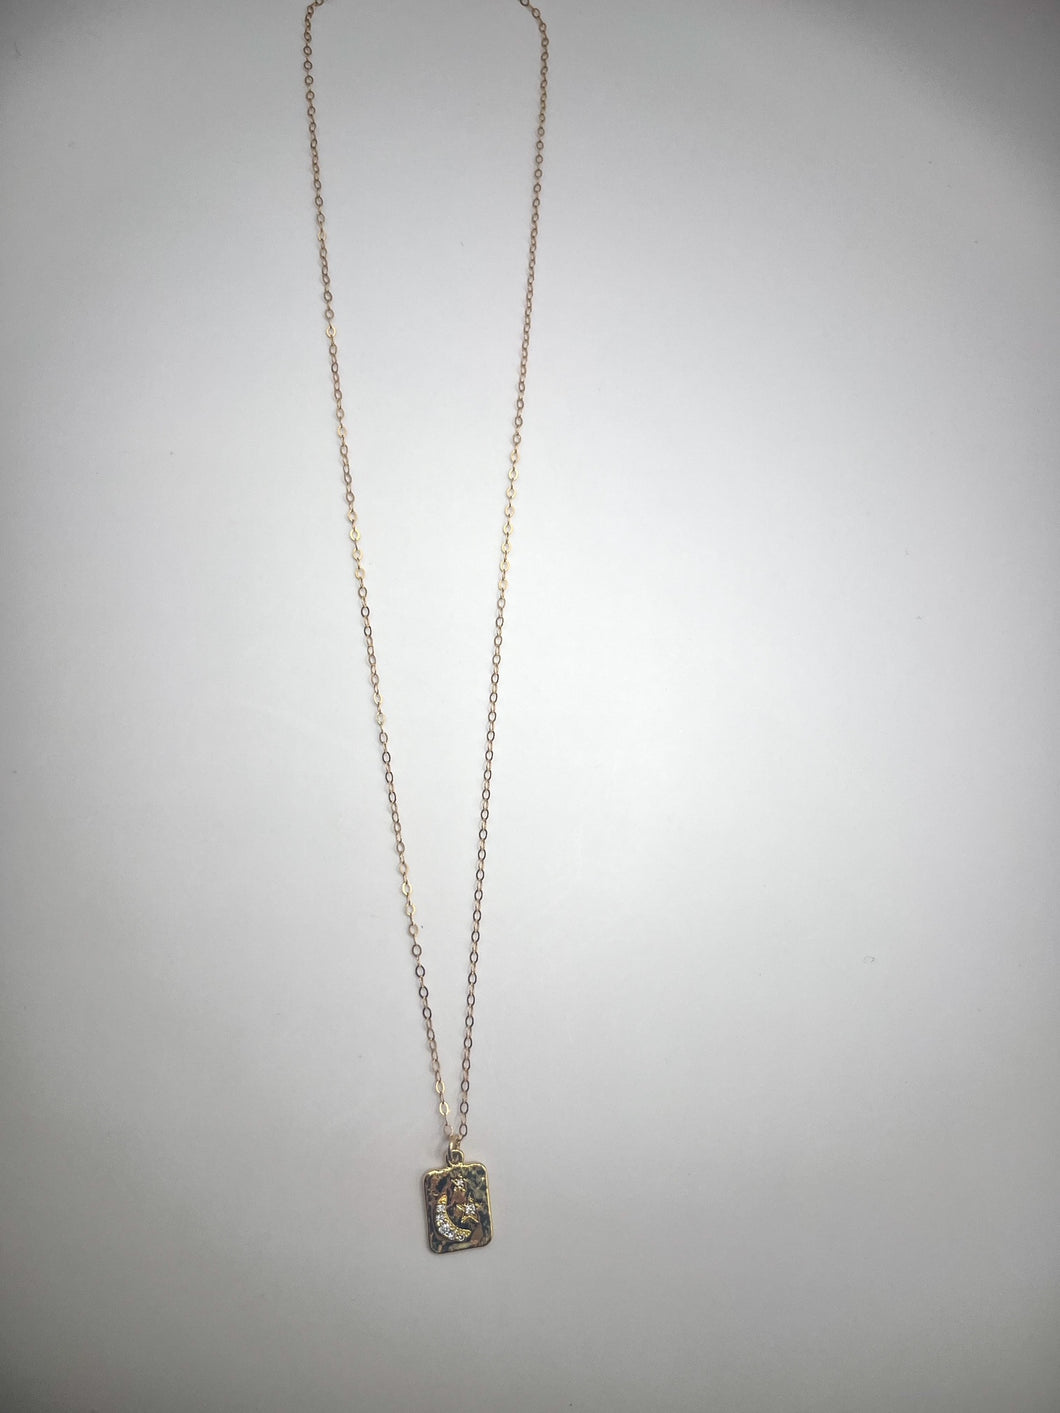 Celestial Moon and Star Bar Necklace - Gold Filled